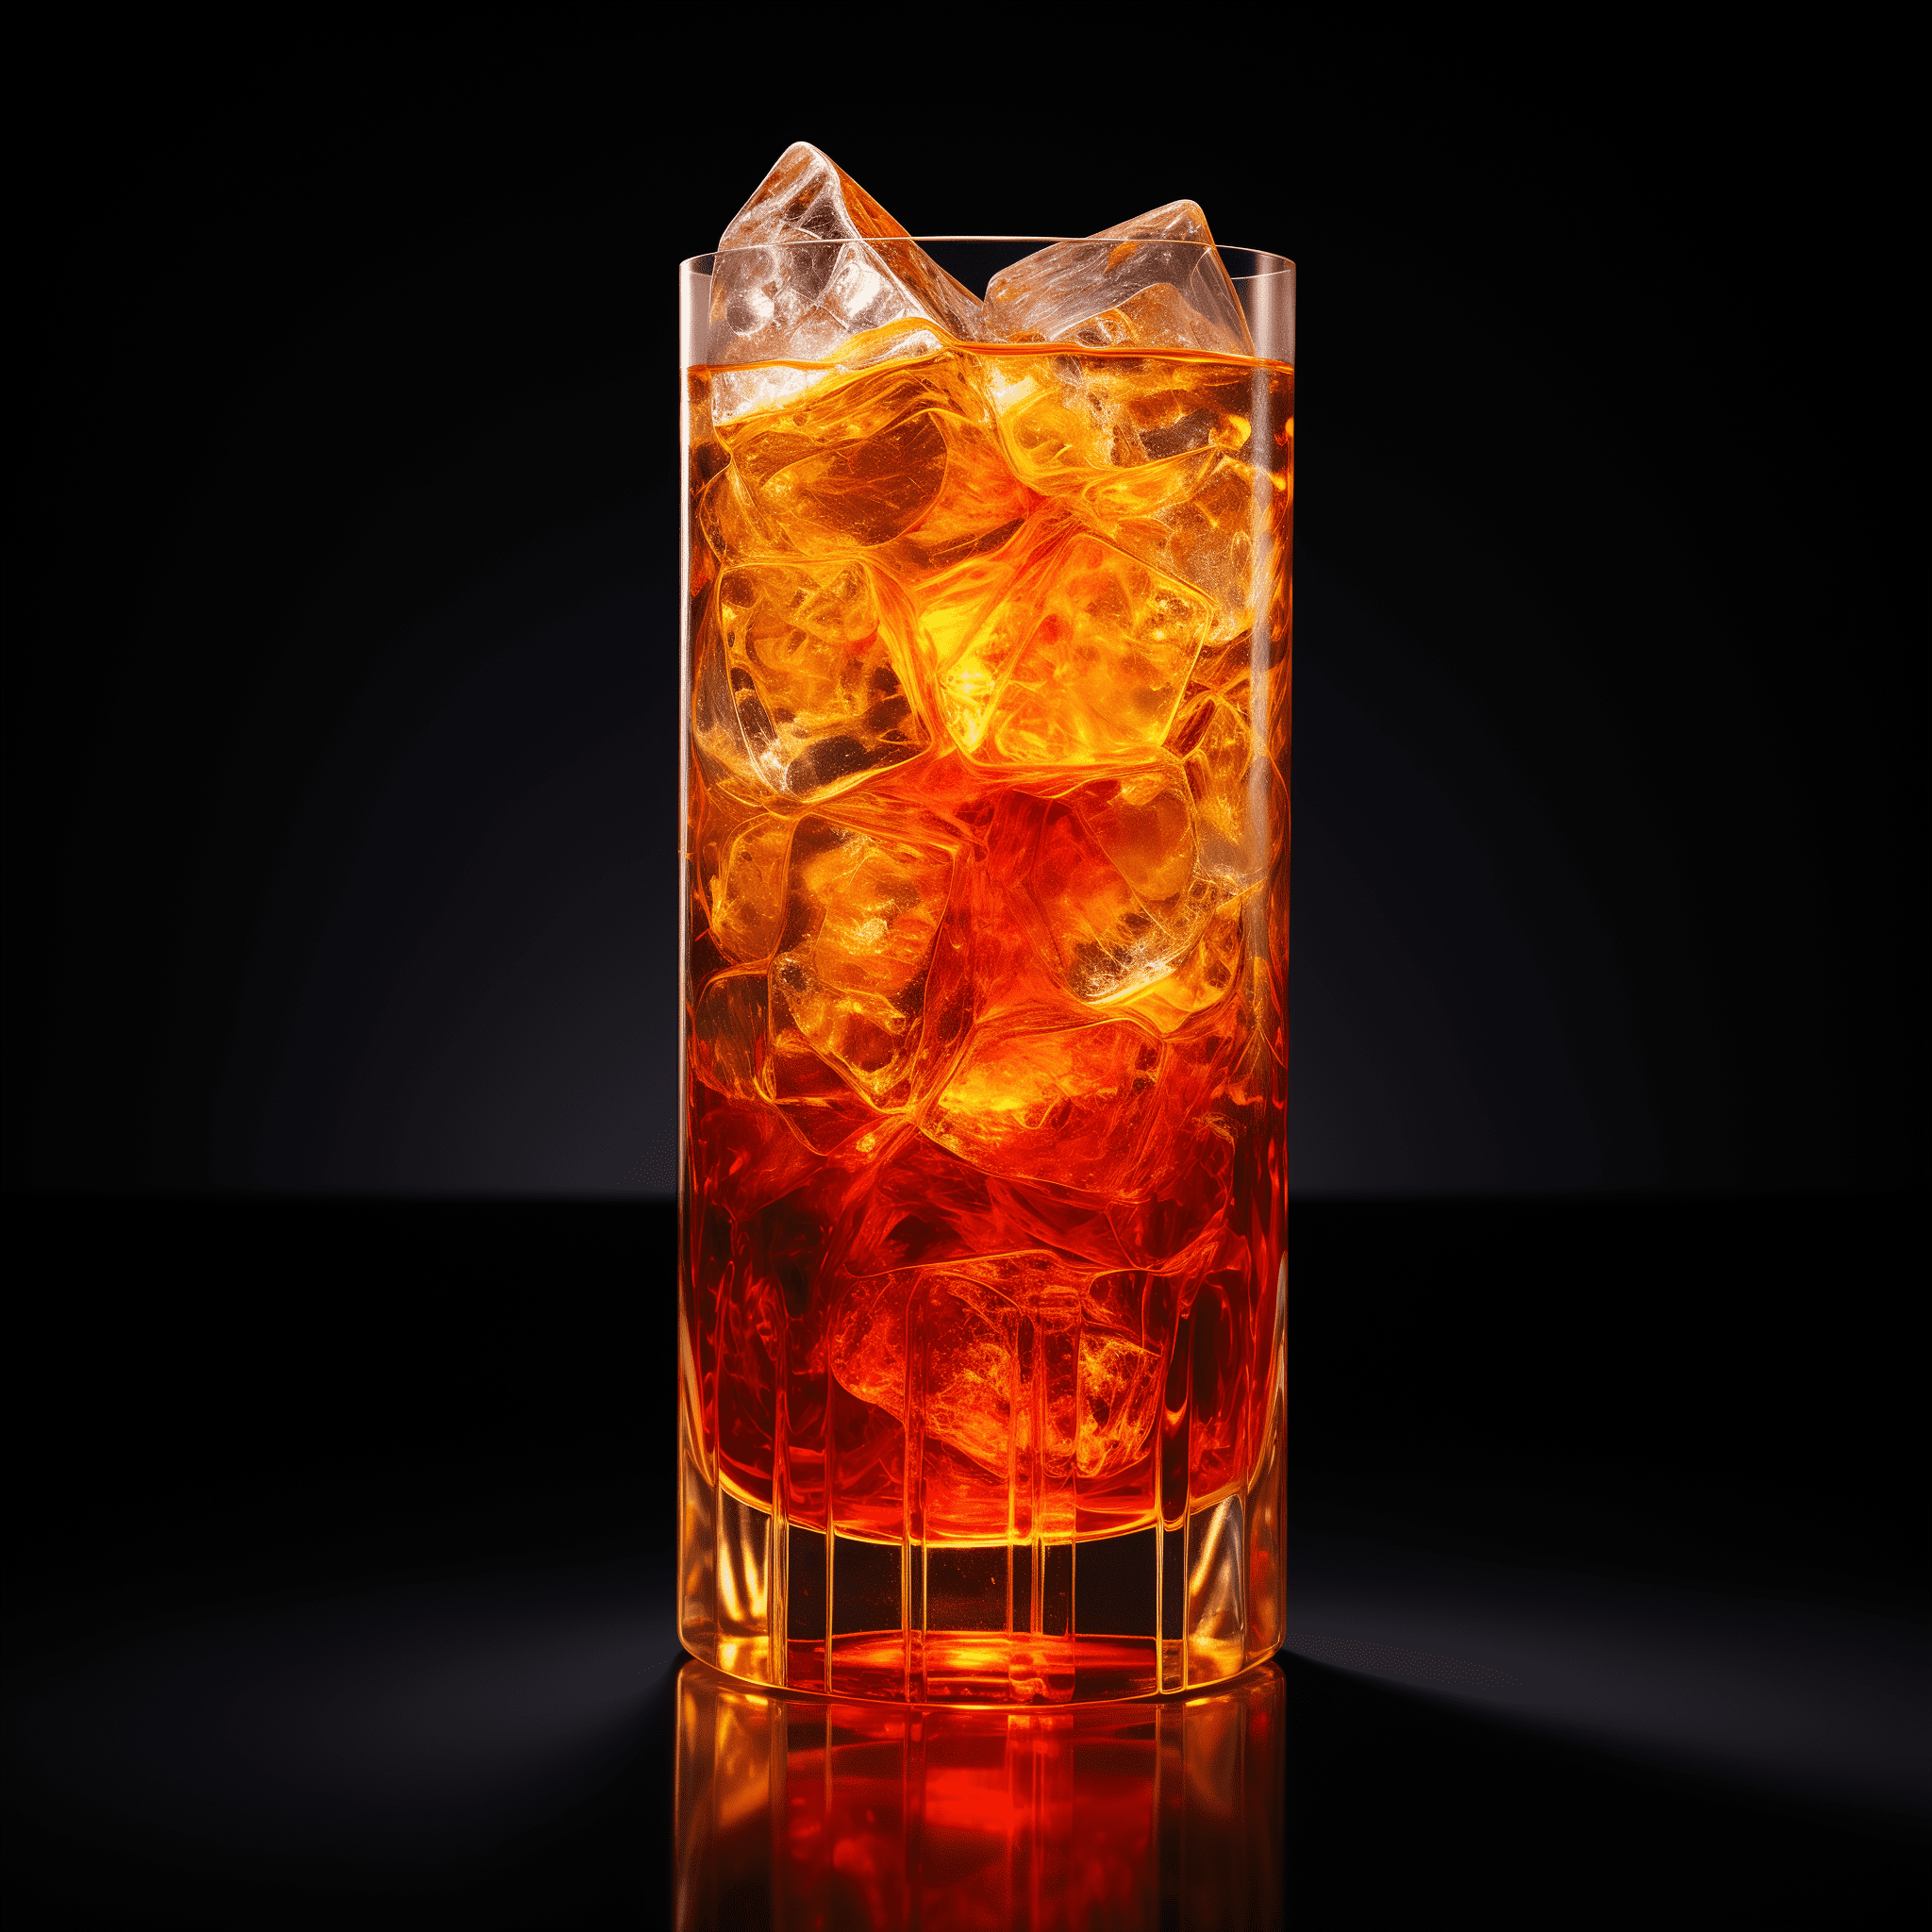 The Bull Blaster is a bold cocktail with a sweet, syrupy base from the Jagermeister, complemented by the carbonated, citrusy zing of Red Bull. It's a strong, invigorating drink with a unique herbal aftertaste.